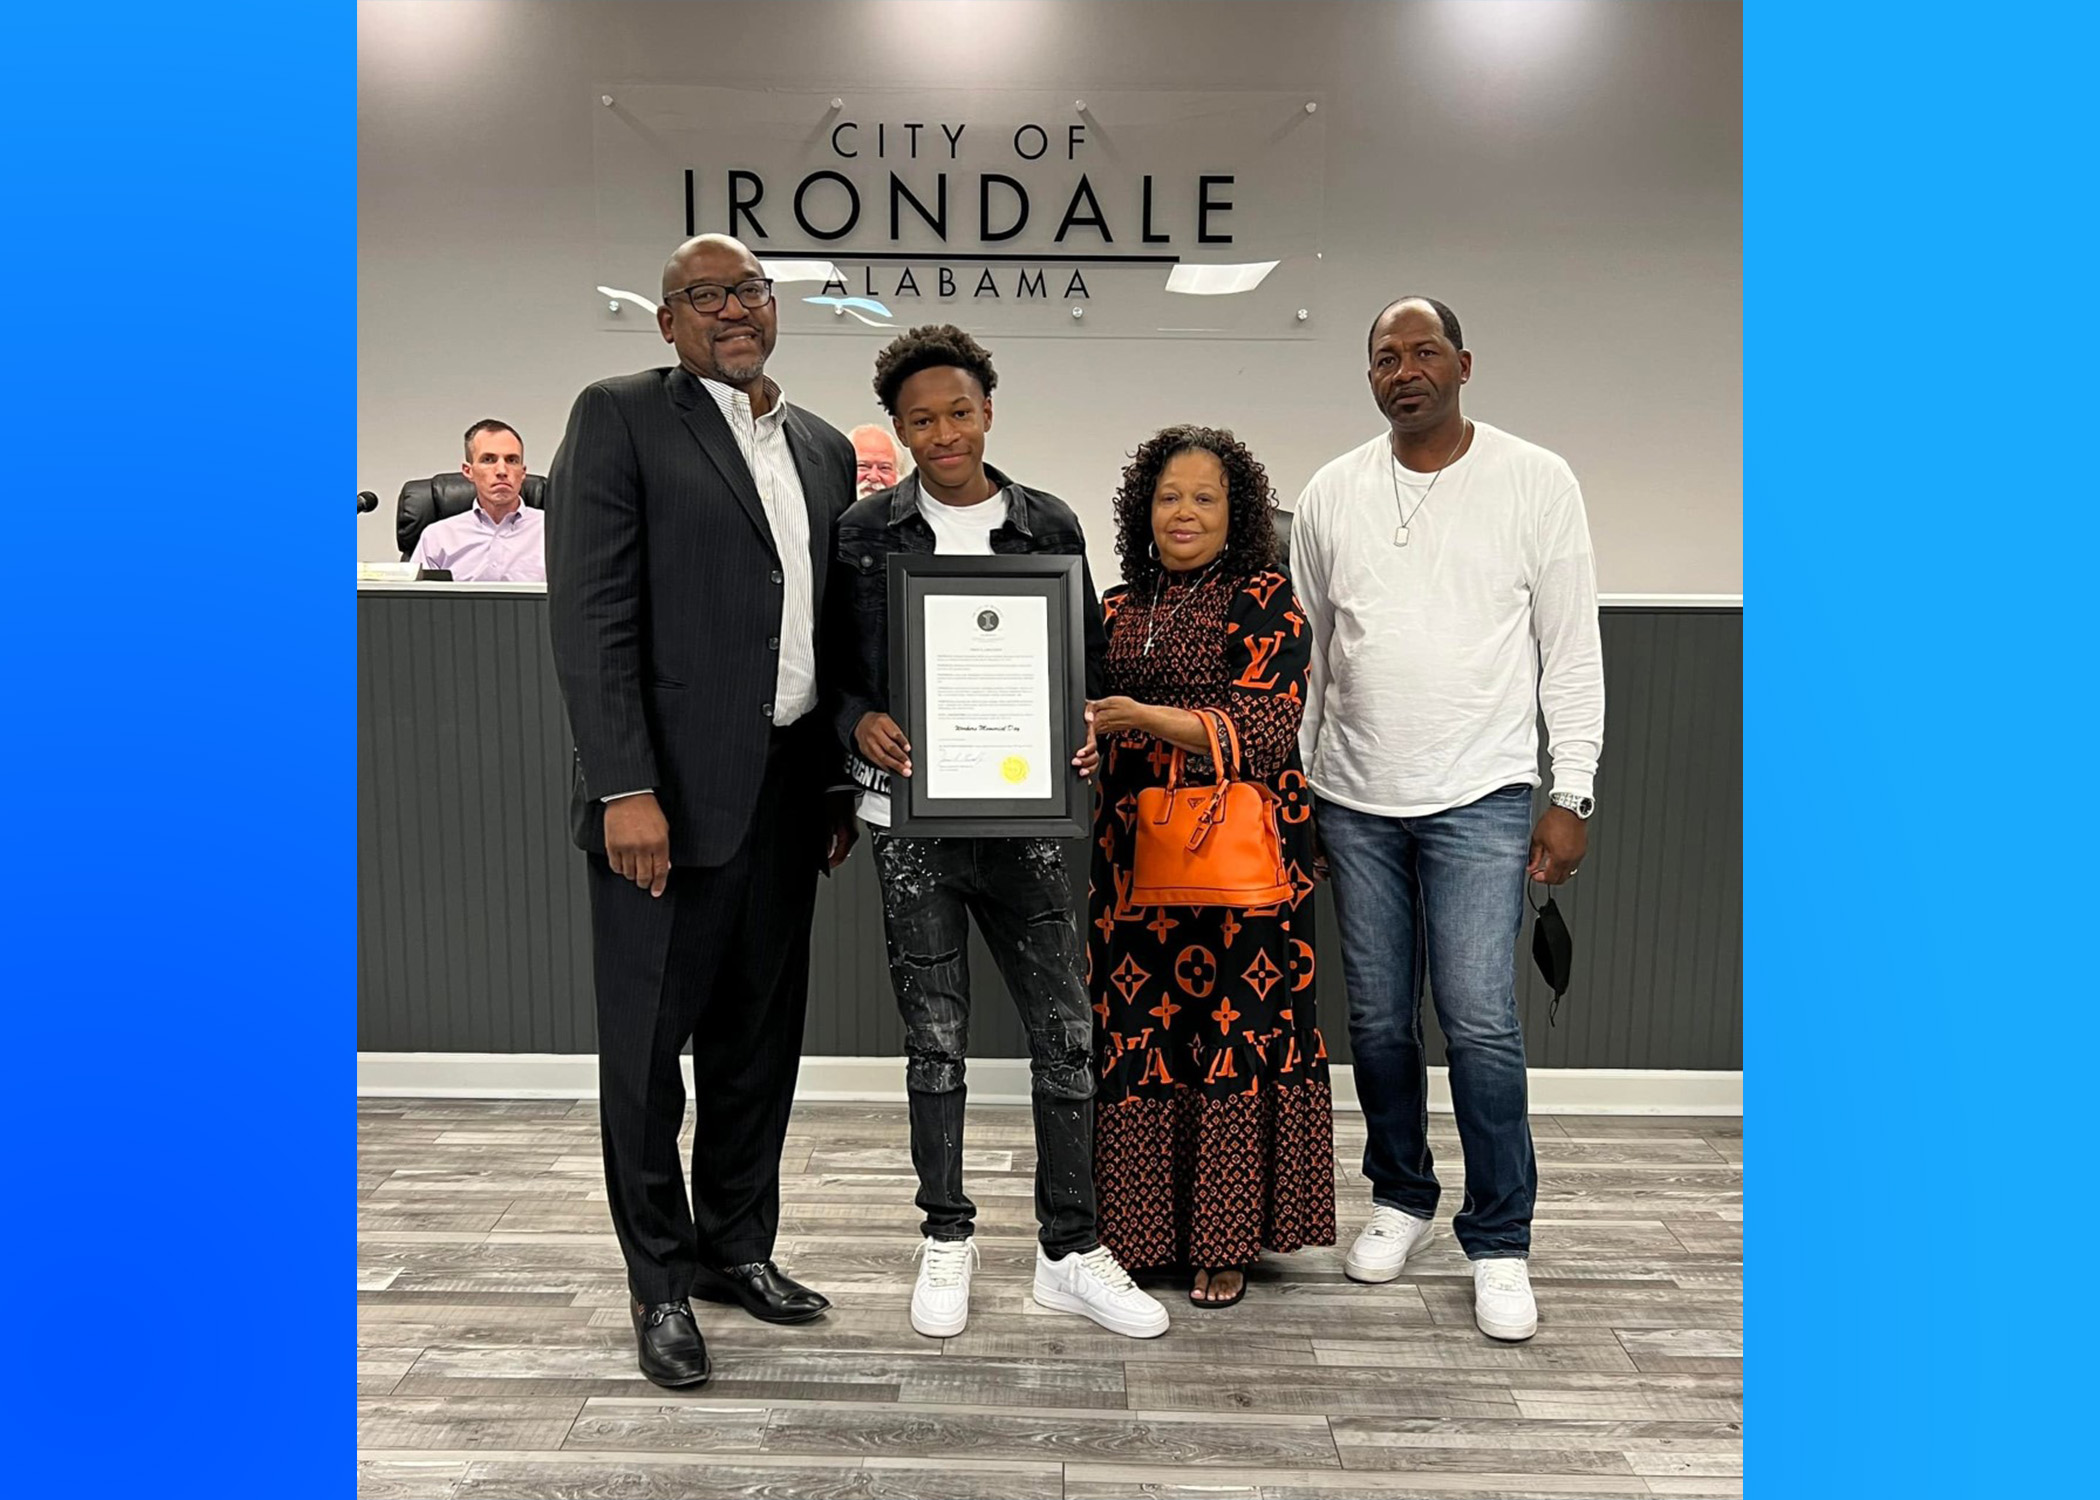 City of Irondale recognizes Workers’ Memorial Day, presents proclamation to resident who lost his life in an industrial accident